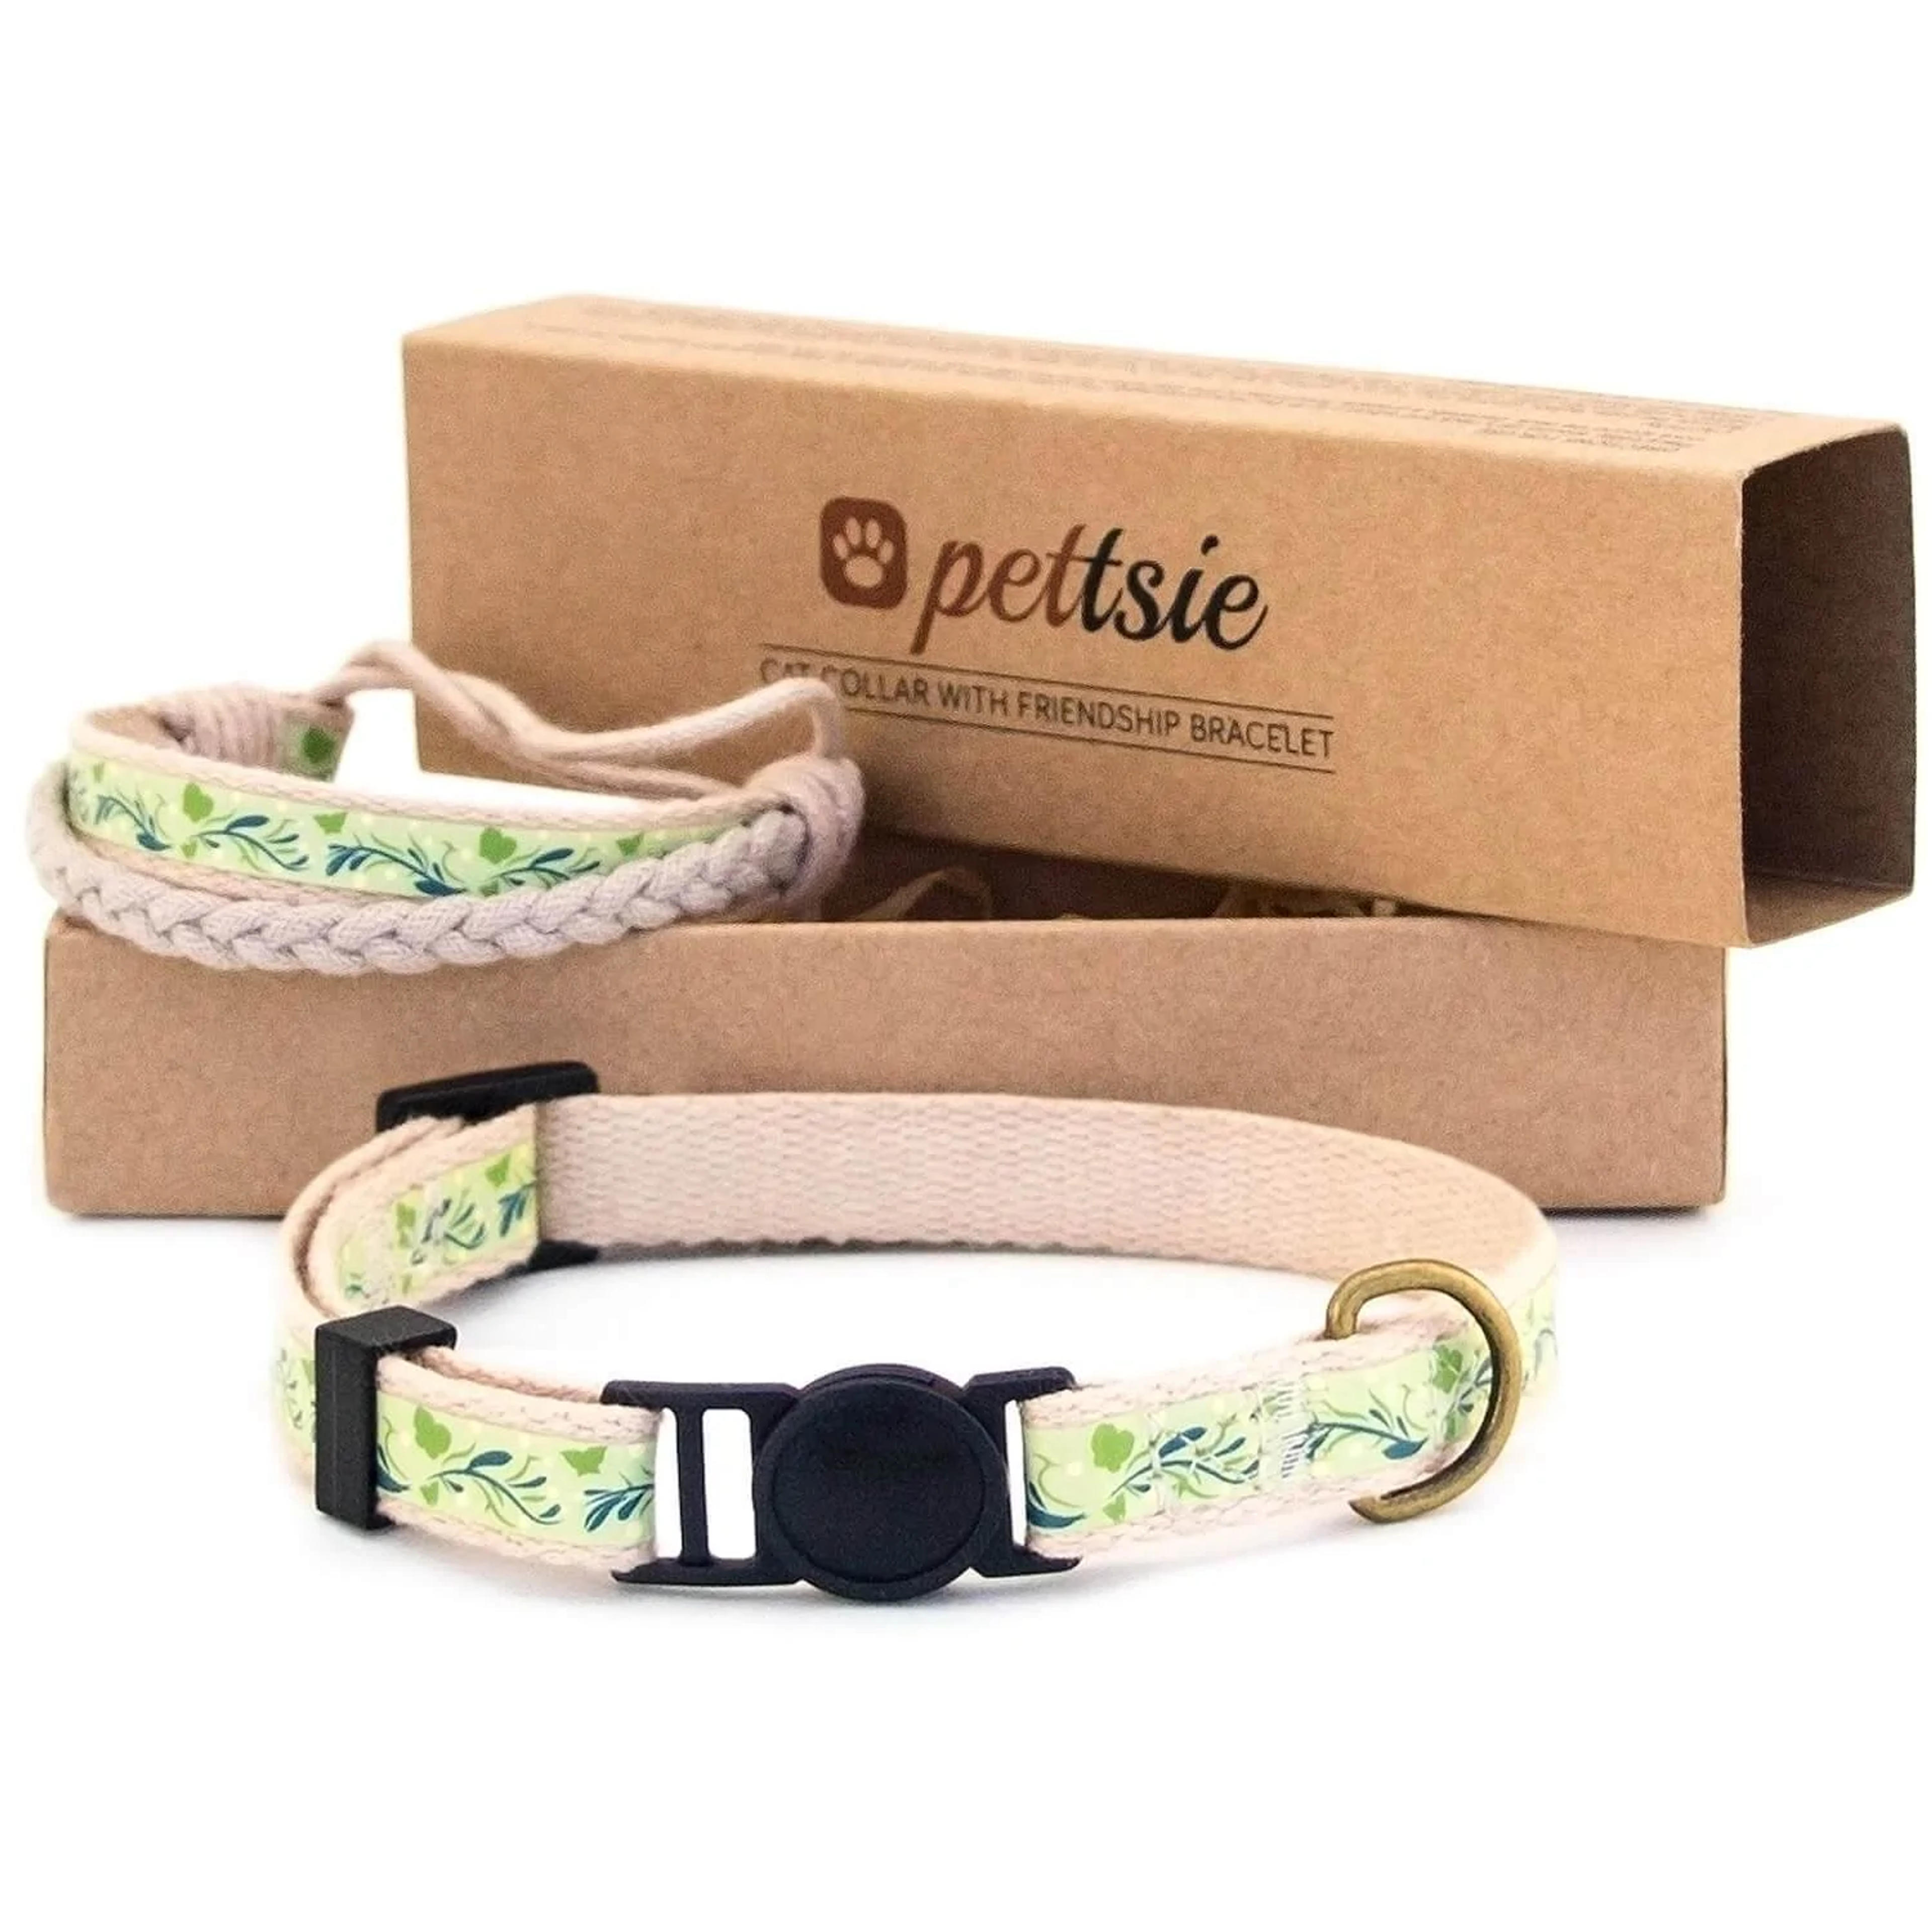 Red kitten collar with safety breakaway buckle and friendship bracelet for you - Green